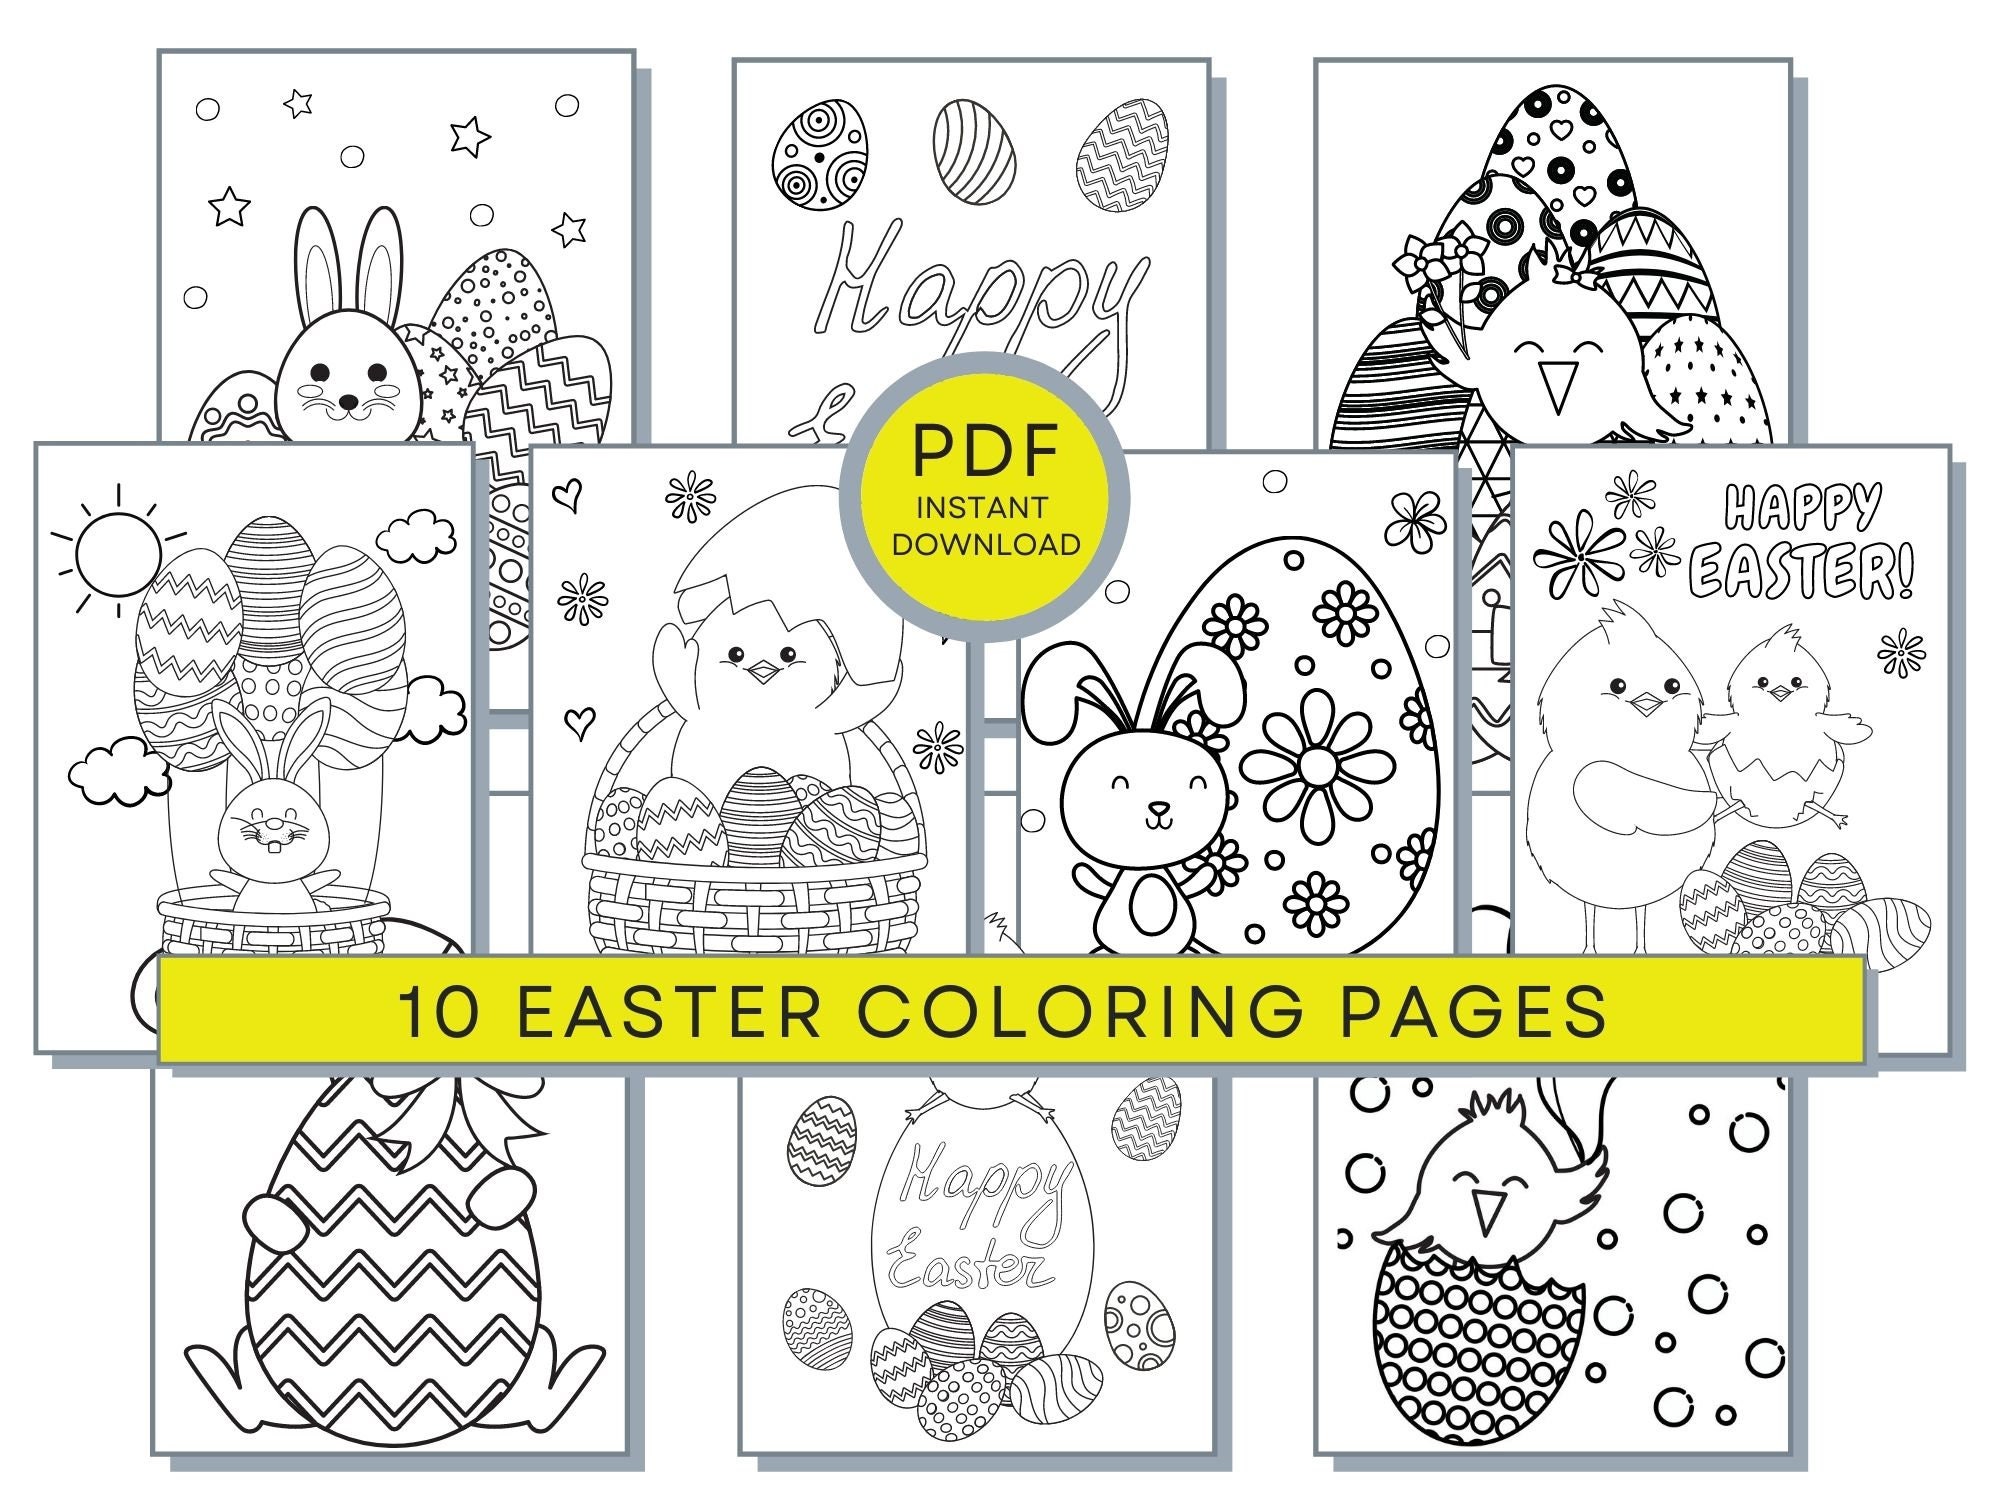 Easter coloring pages easter pdf coloring easter printables bunny coloring sheets good friday coloring pages easter activity page